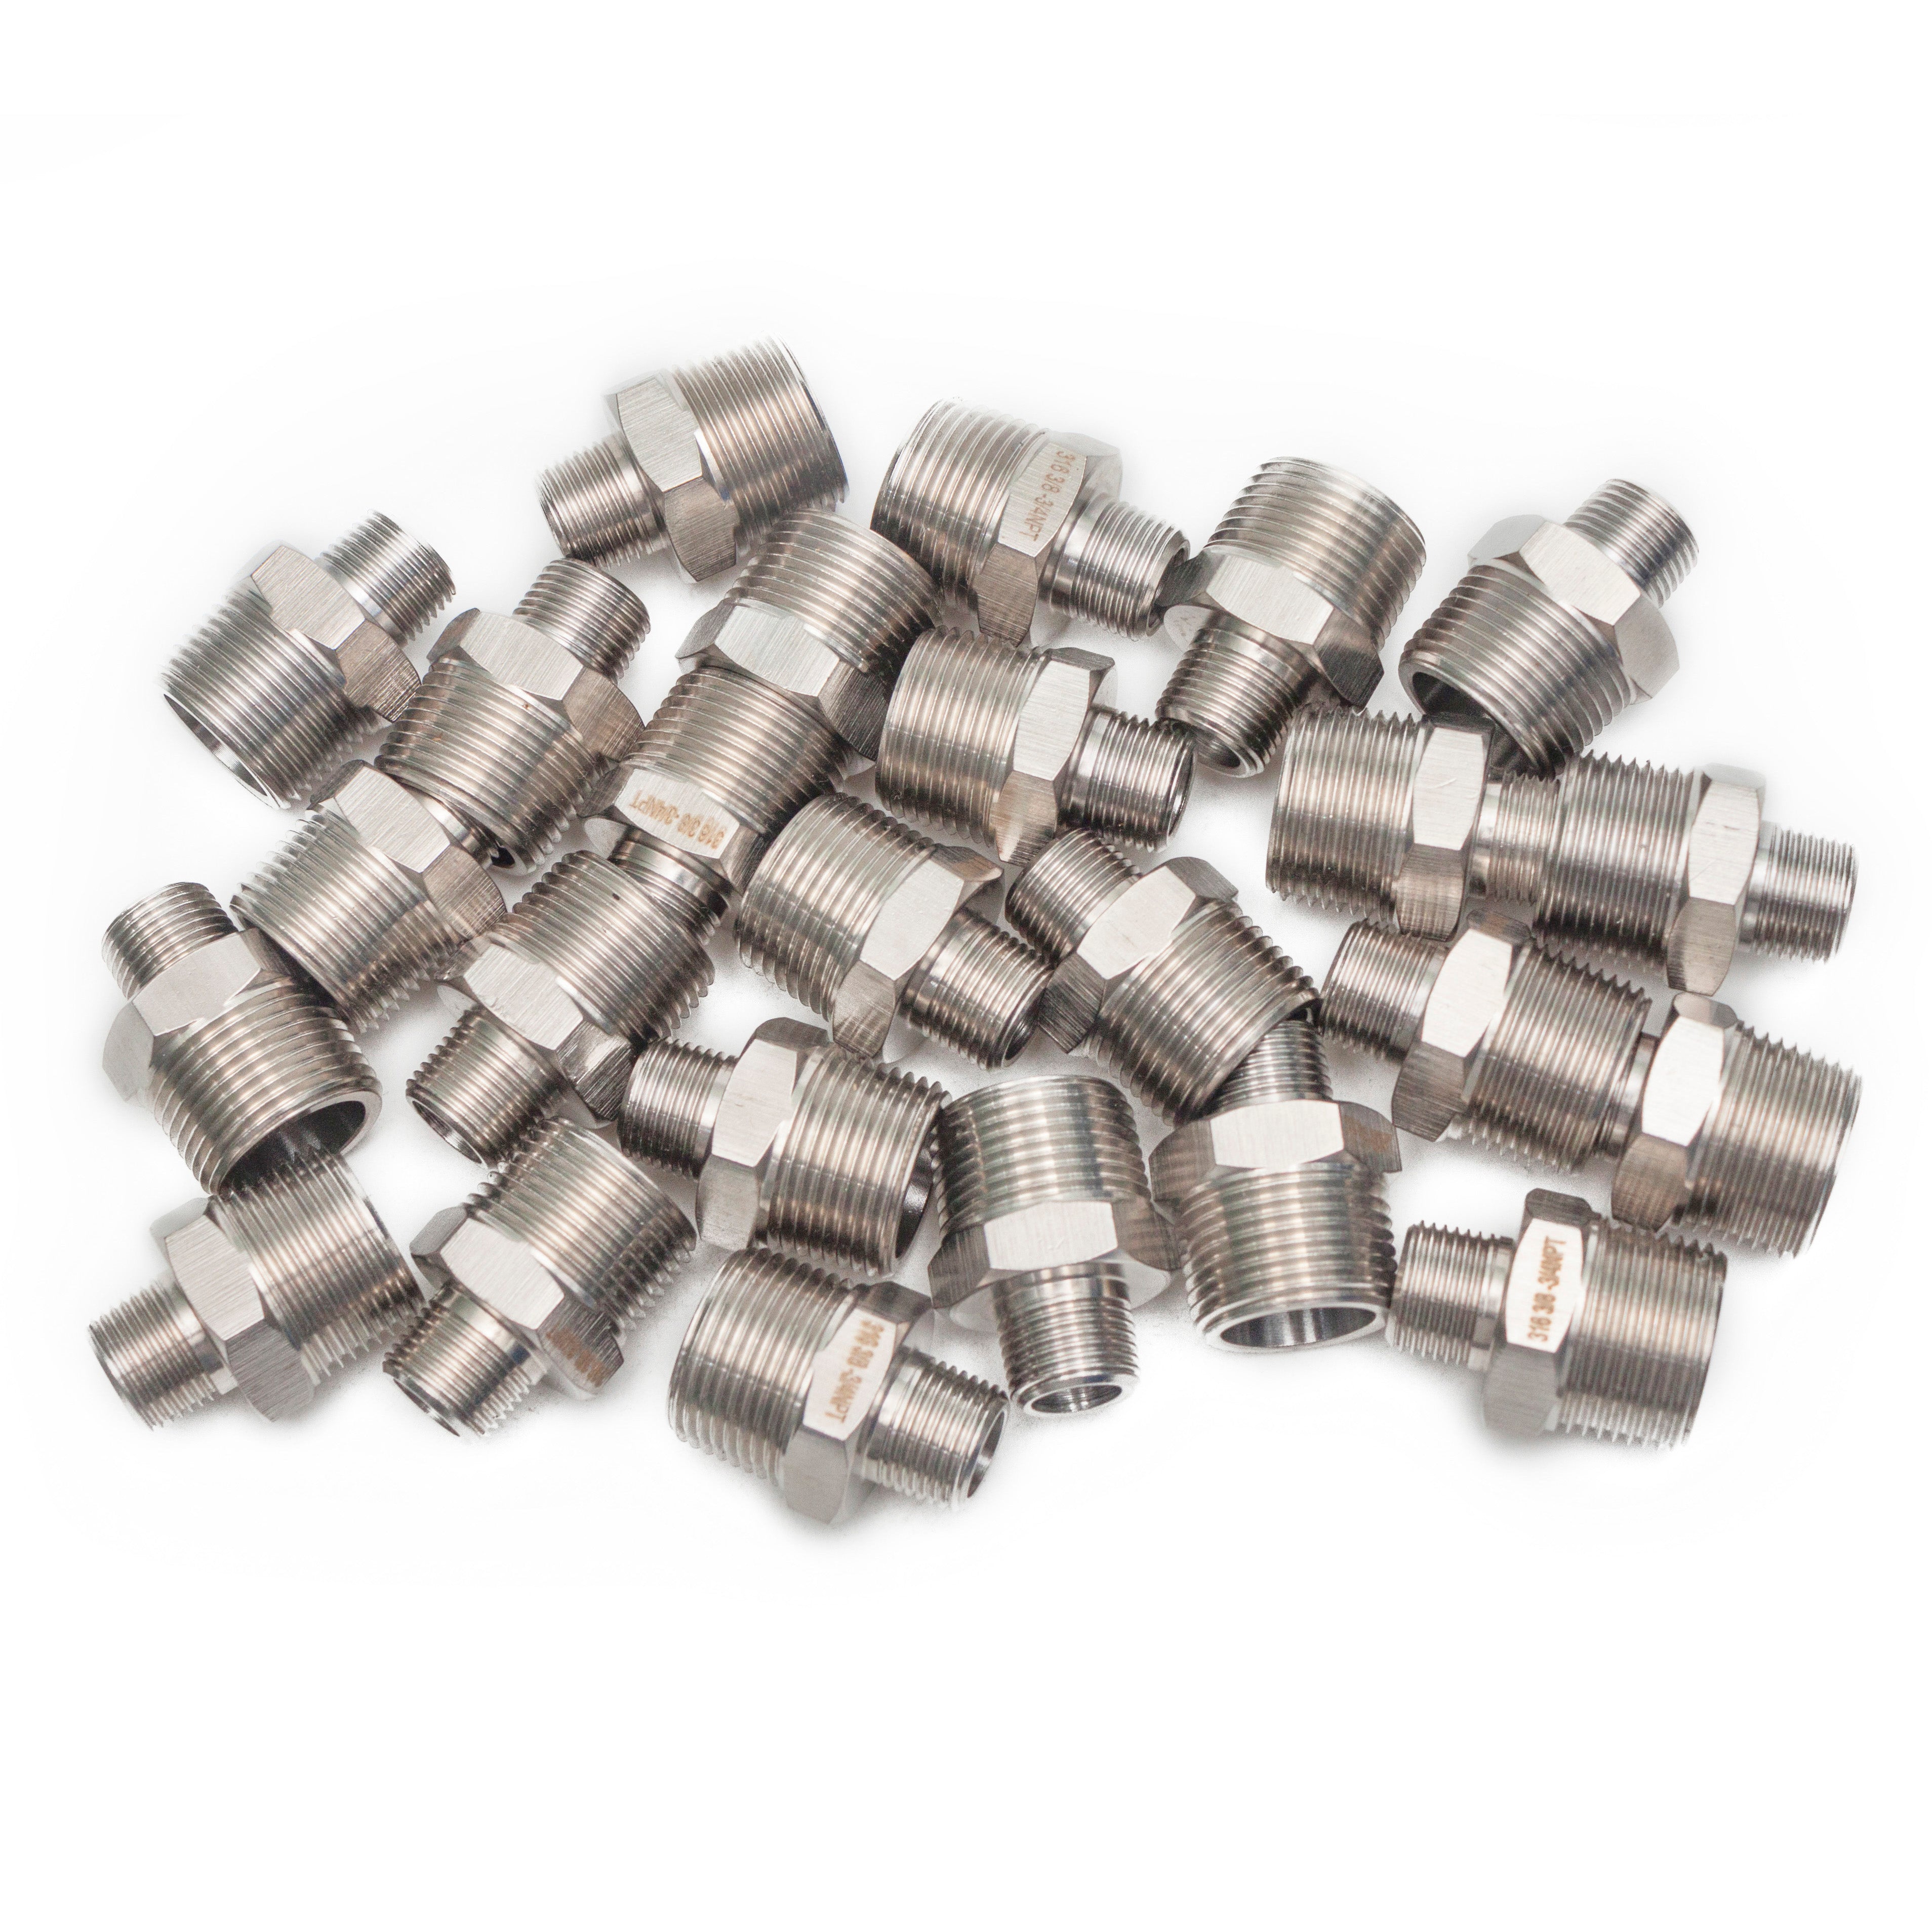 LTWFITTING Bar Production Stainless Steel 316 Pipe Hex Reducing Nipple Fitting 3/4 Inch x 3/8 Inch Male NPT Water Boat (Pack of 25)